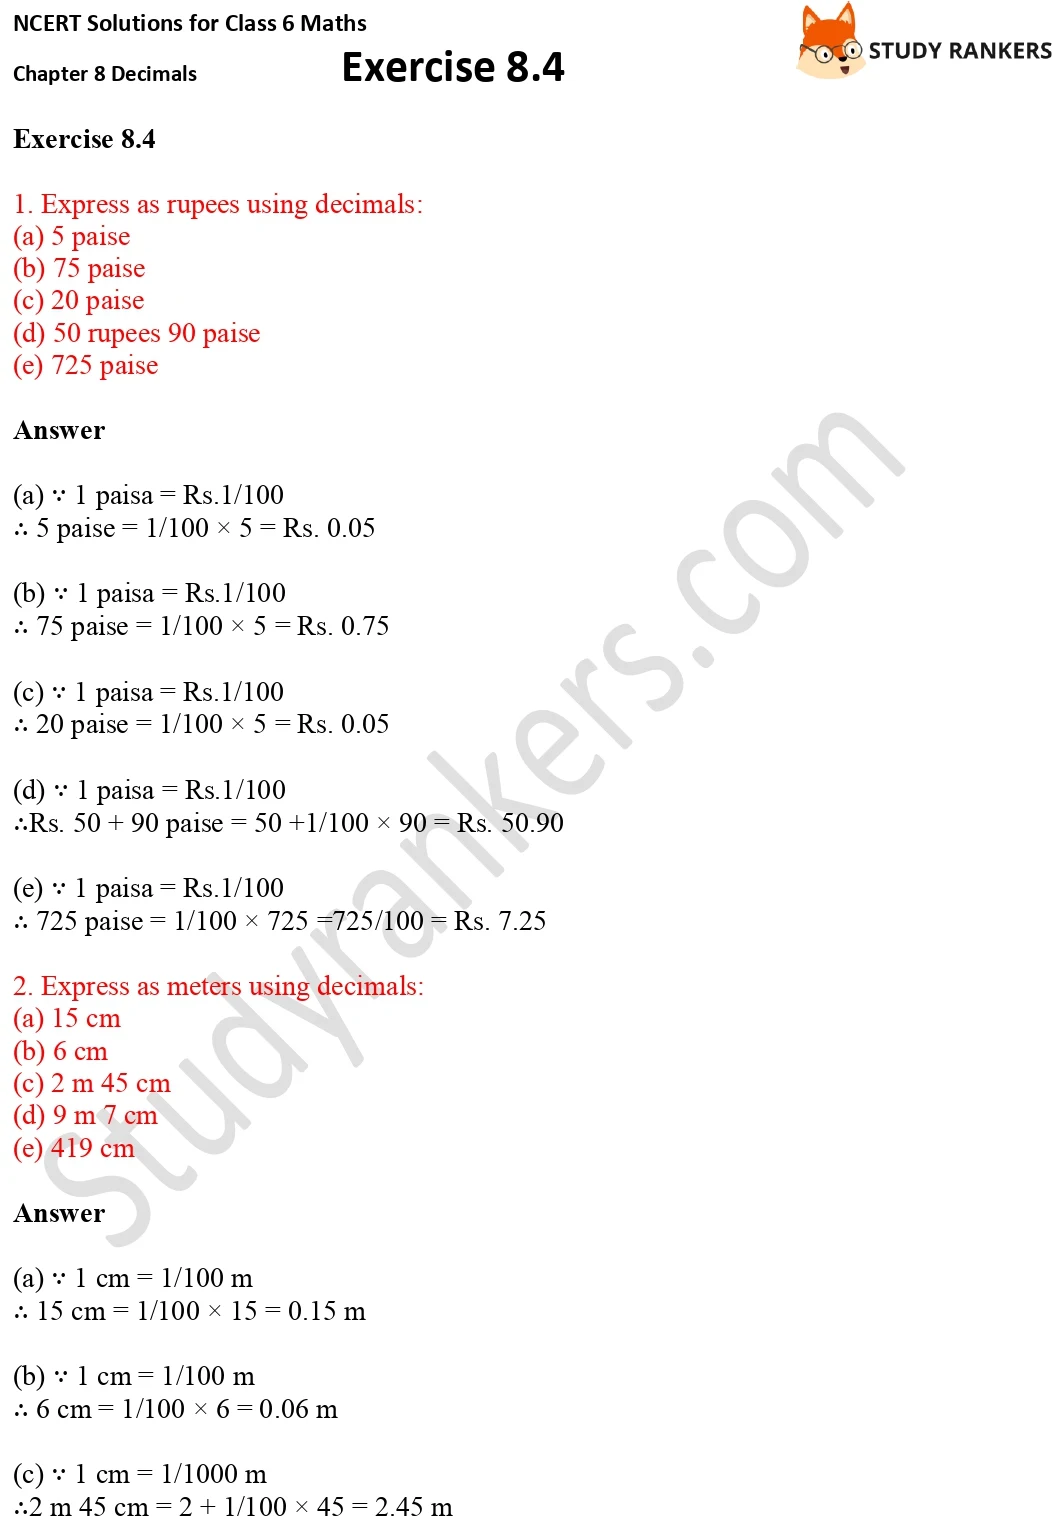 NCERT Solutions for Class 6 Maths Chapter 8 Decimals Exercise 8.4 Part 1